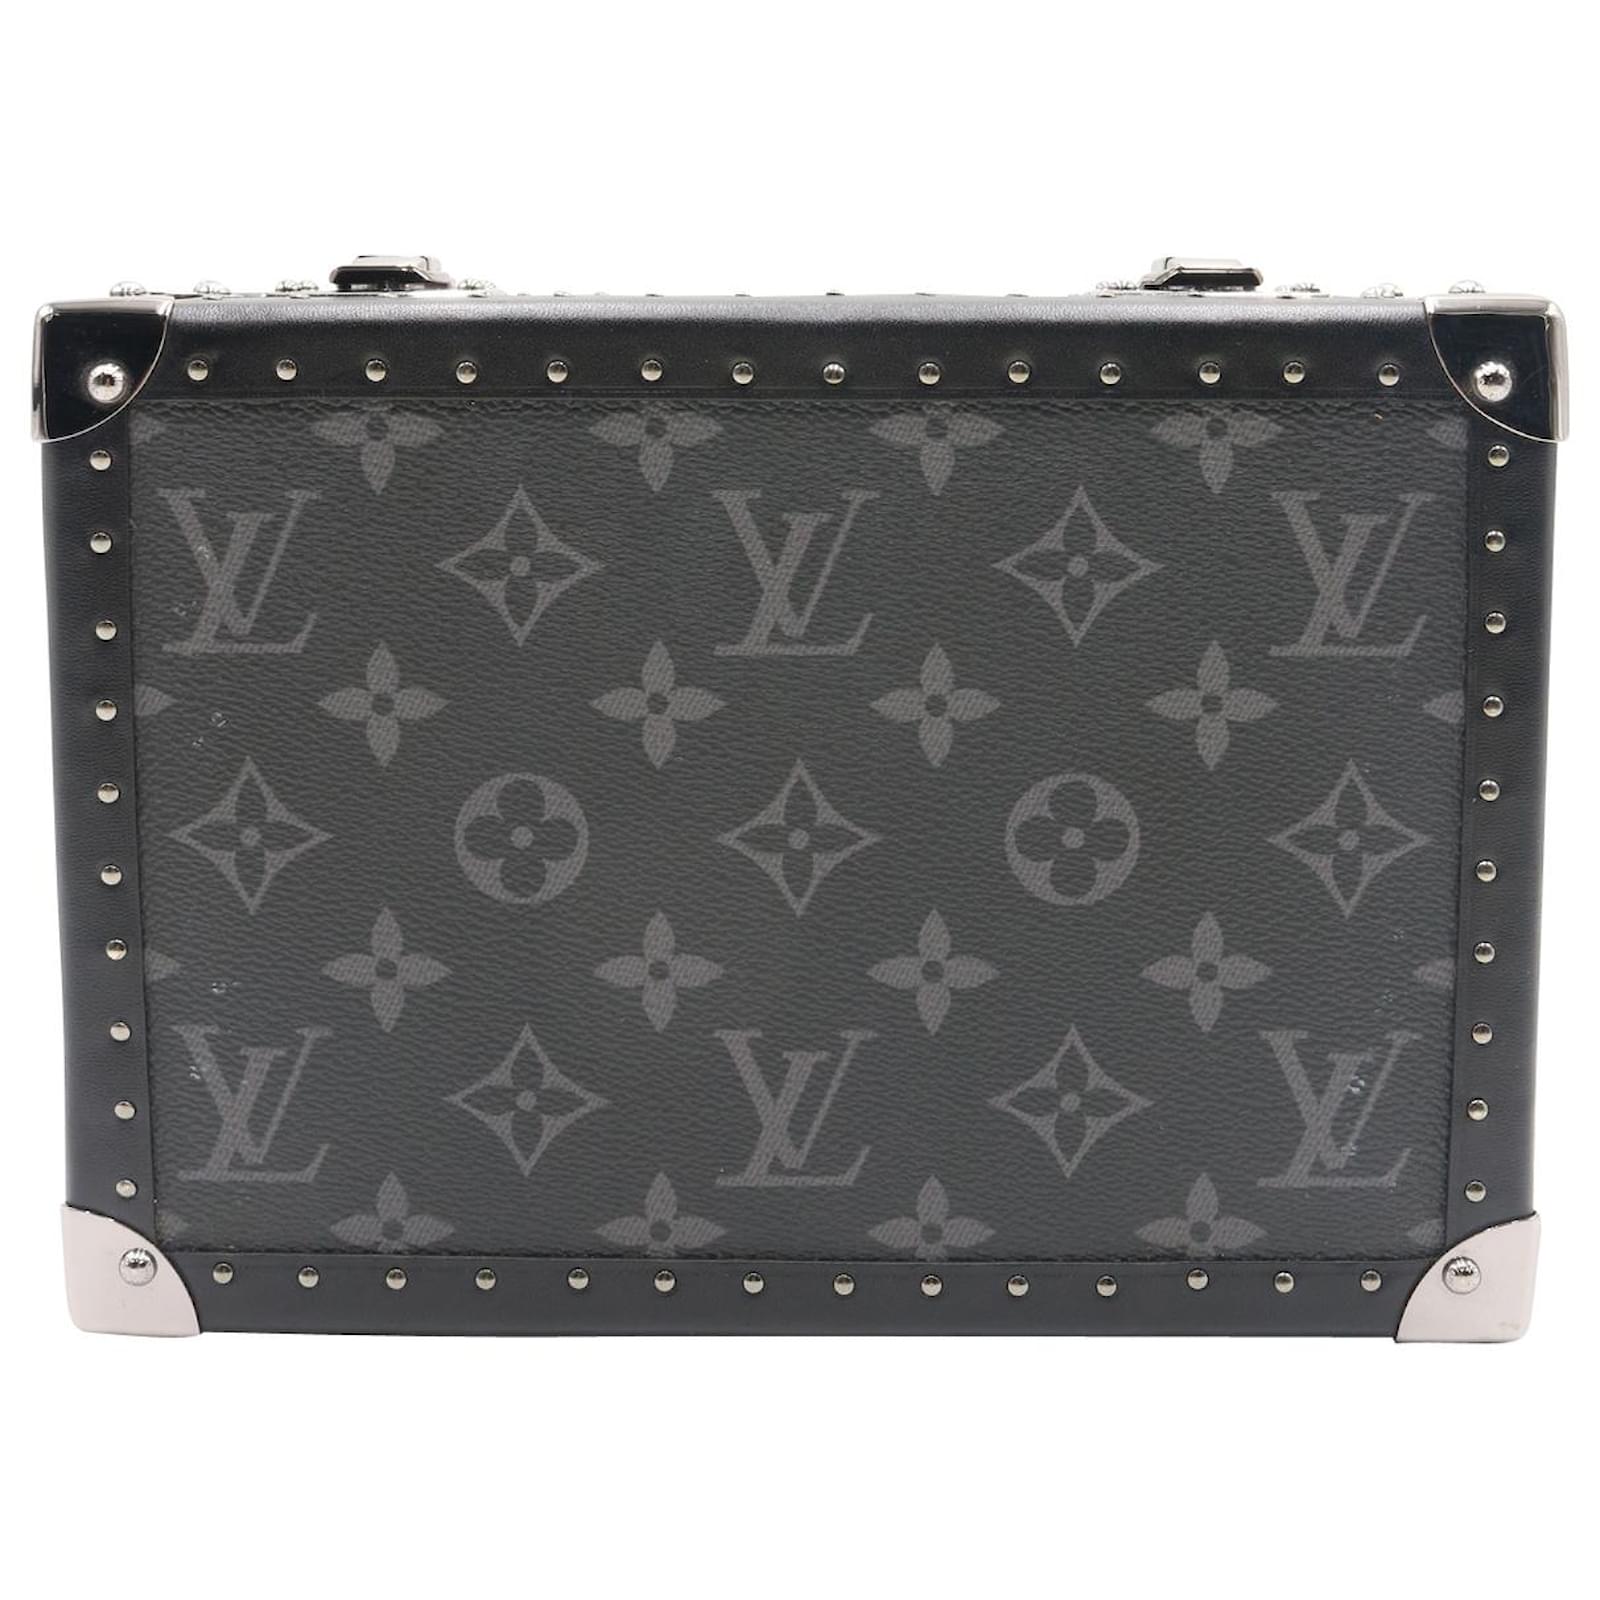 LV Clutch Box Bag Trunk 😍👍🏻 available in Monogram Eclipse & Macasar